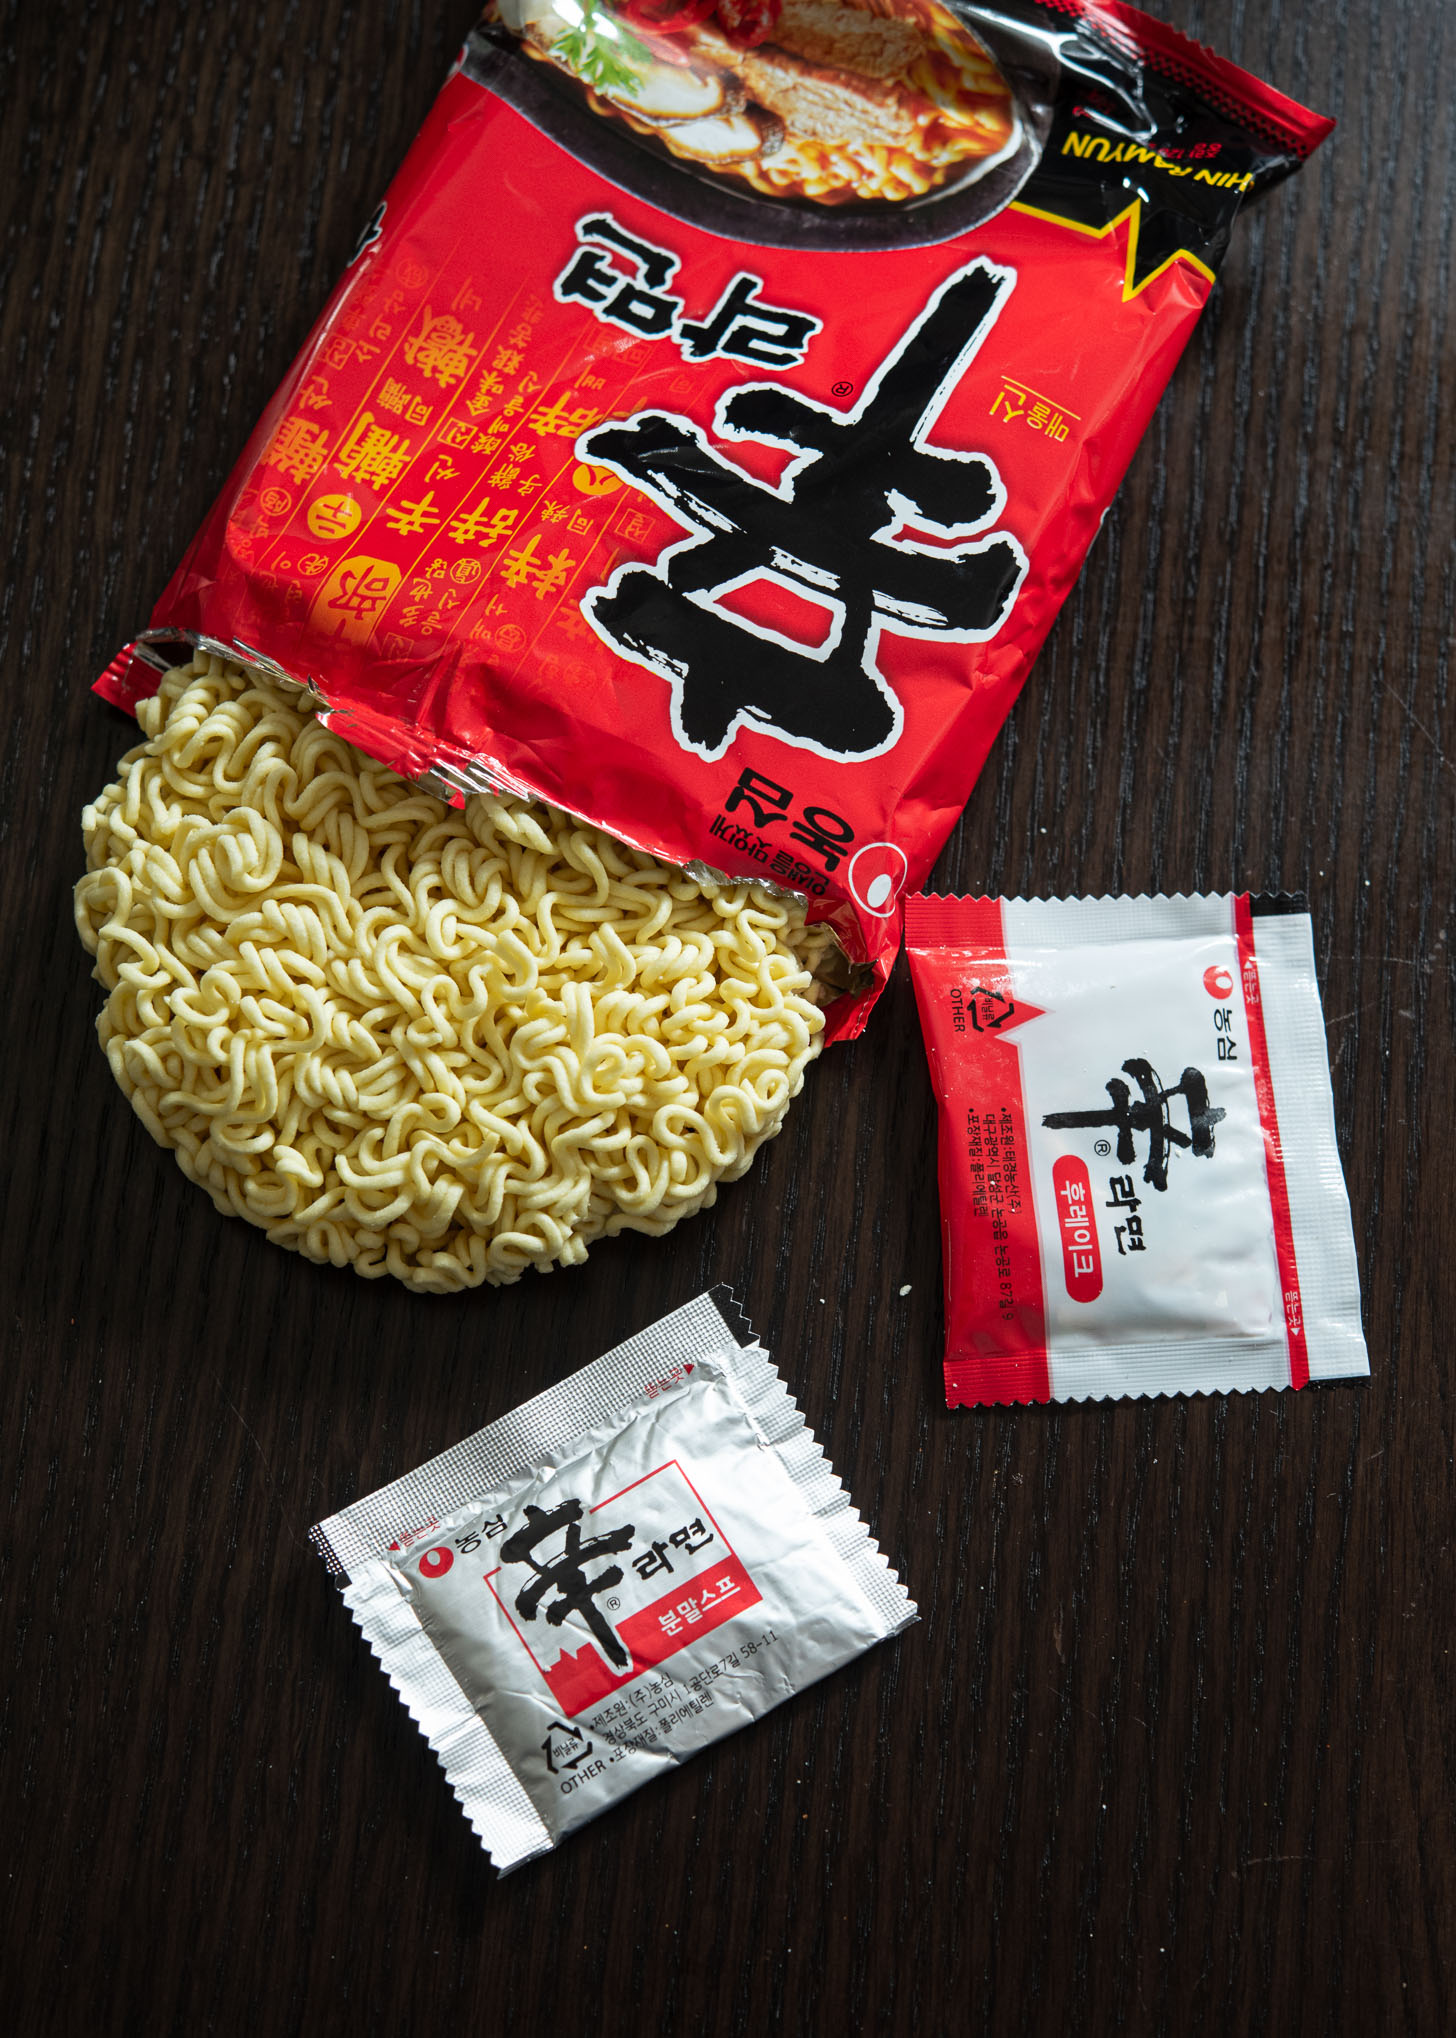 A packet of Korean instant ramen (ramyeon) opened and showing the noodles and seasoning packets.